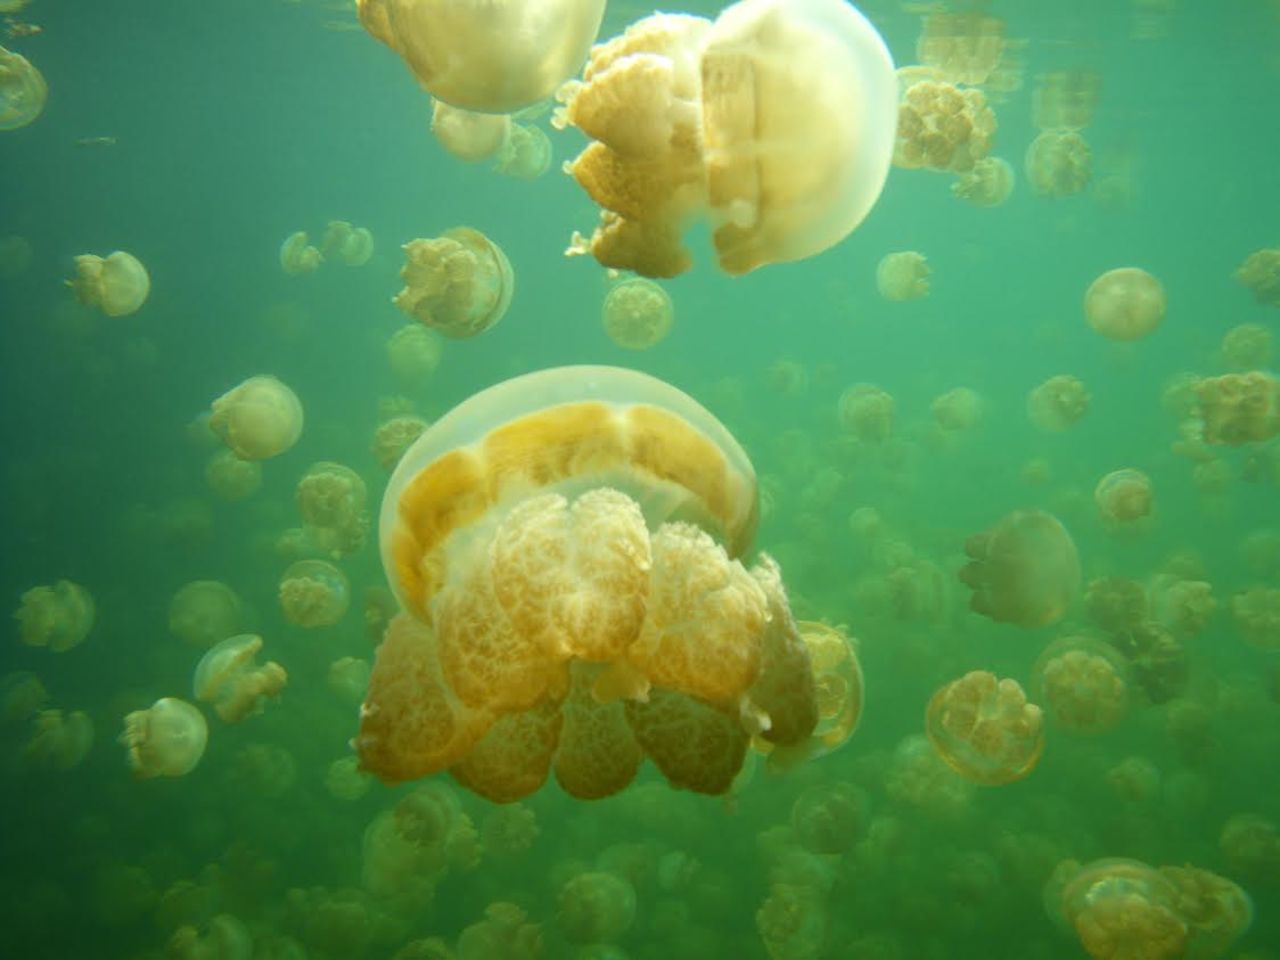 Hidden away on a tiny Palau island called Eil Malk, the saltwater Jellyfish Lake is the site of a daily migration of gold jellyfish following the sun across the lake.